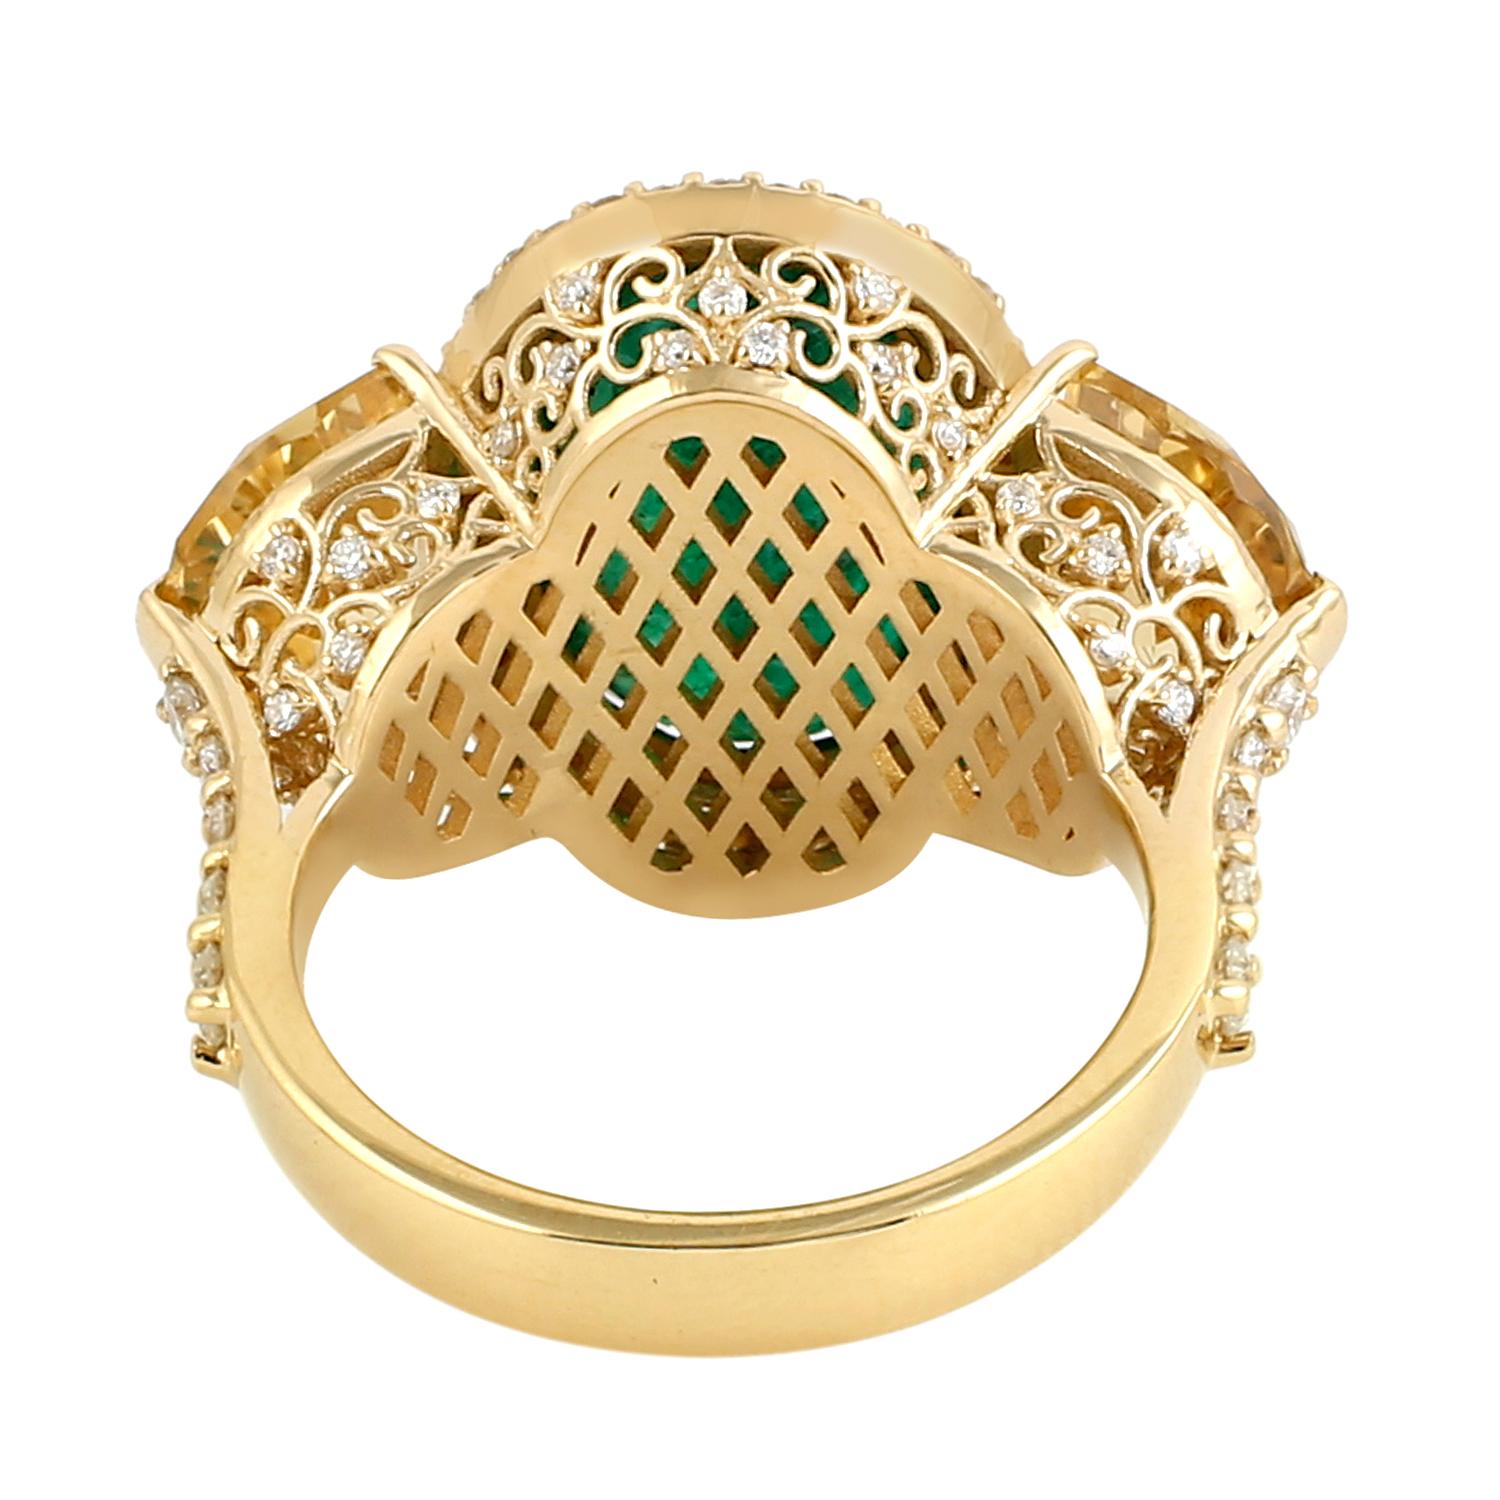 Women's Oval Shaped Zambian Emerald Cocktail Ring With Citrine For Sale